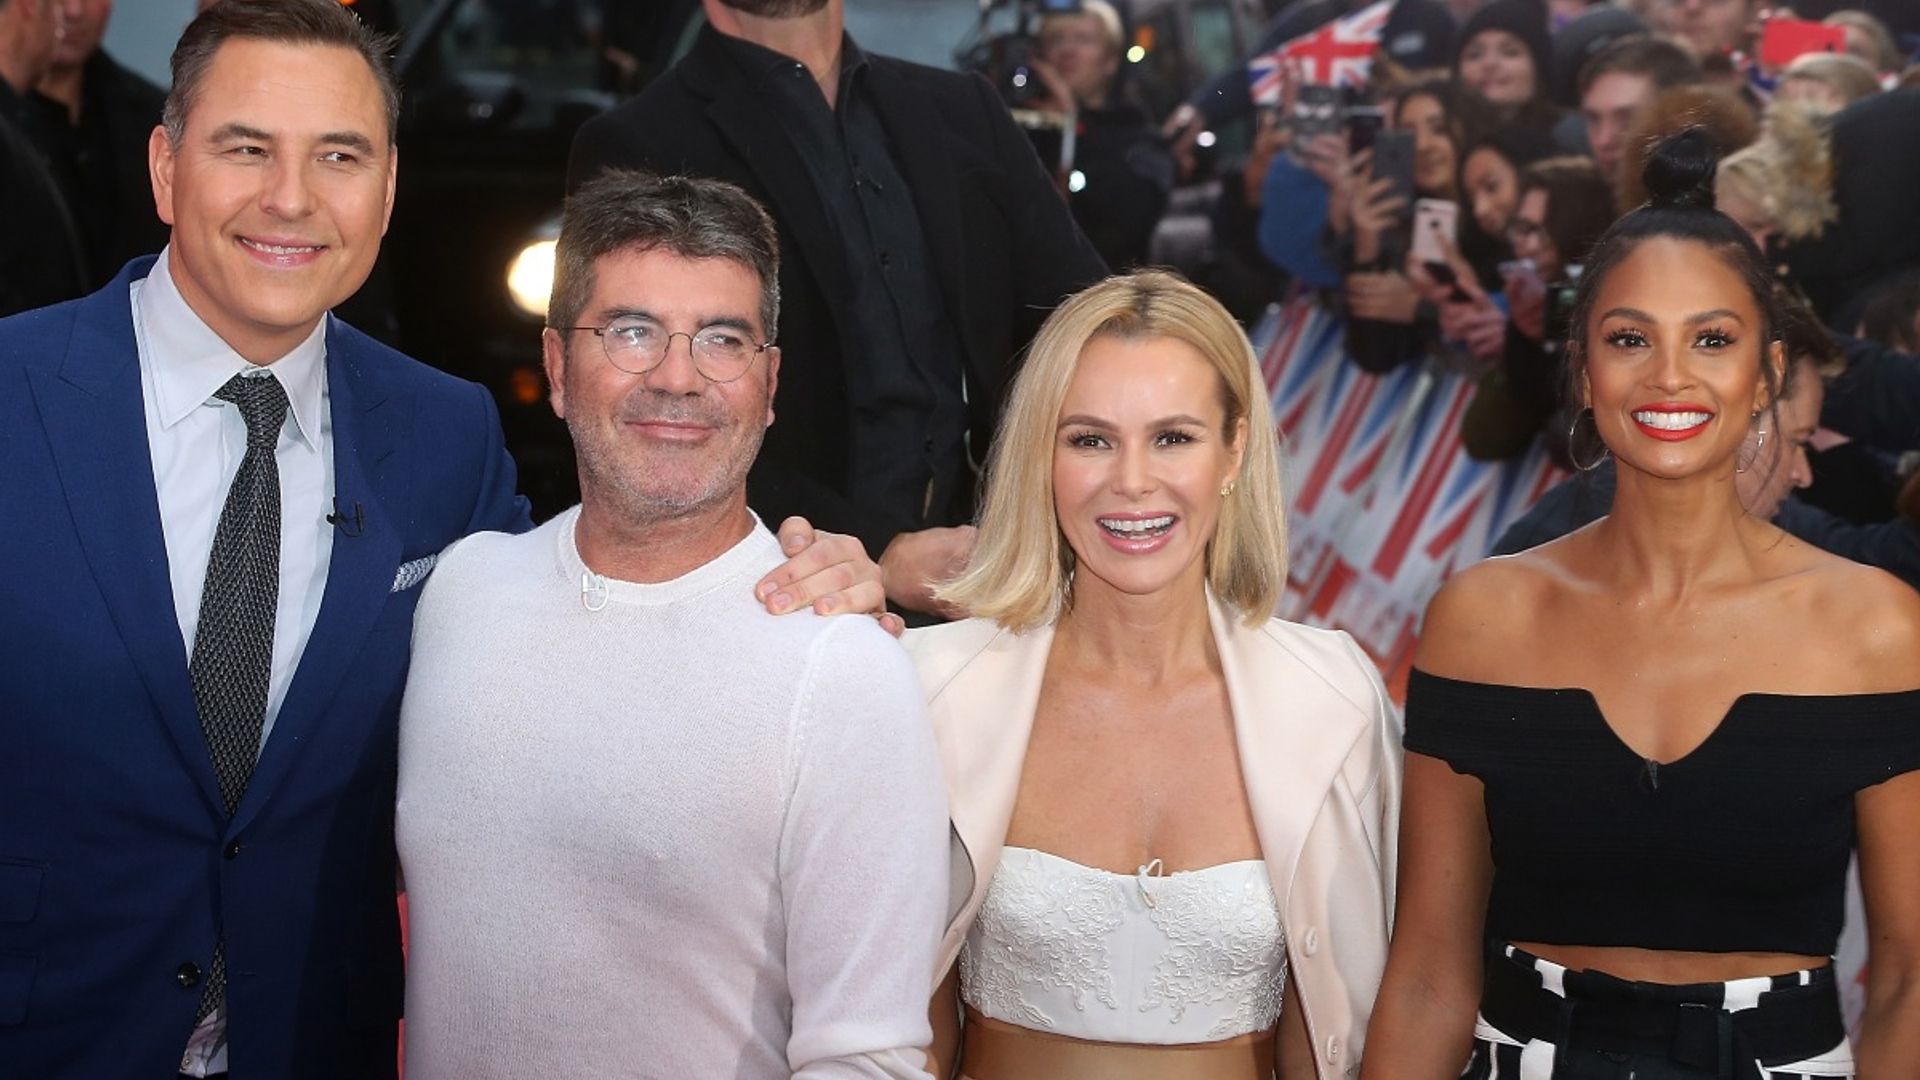 Britain’s Got Talent what have other judges said about David Walliams